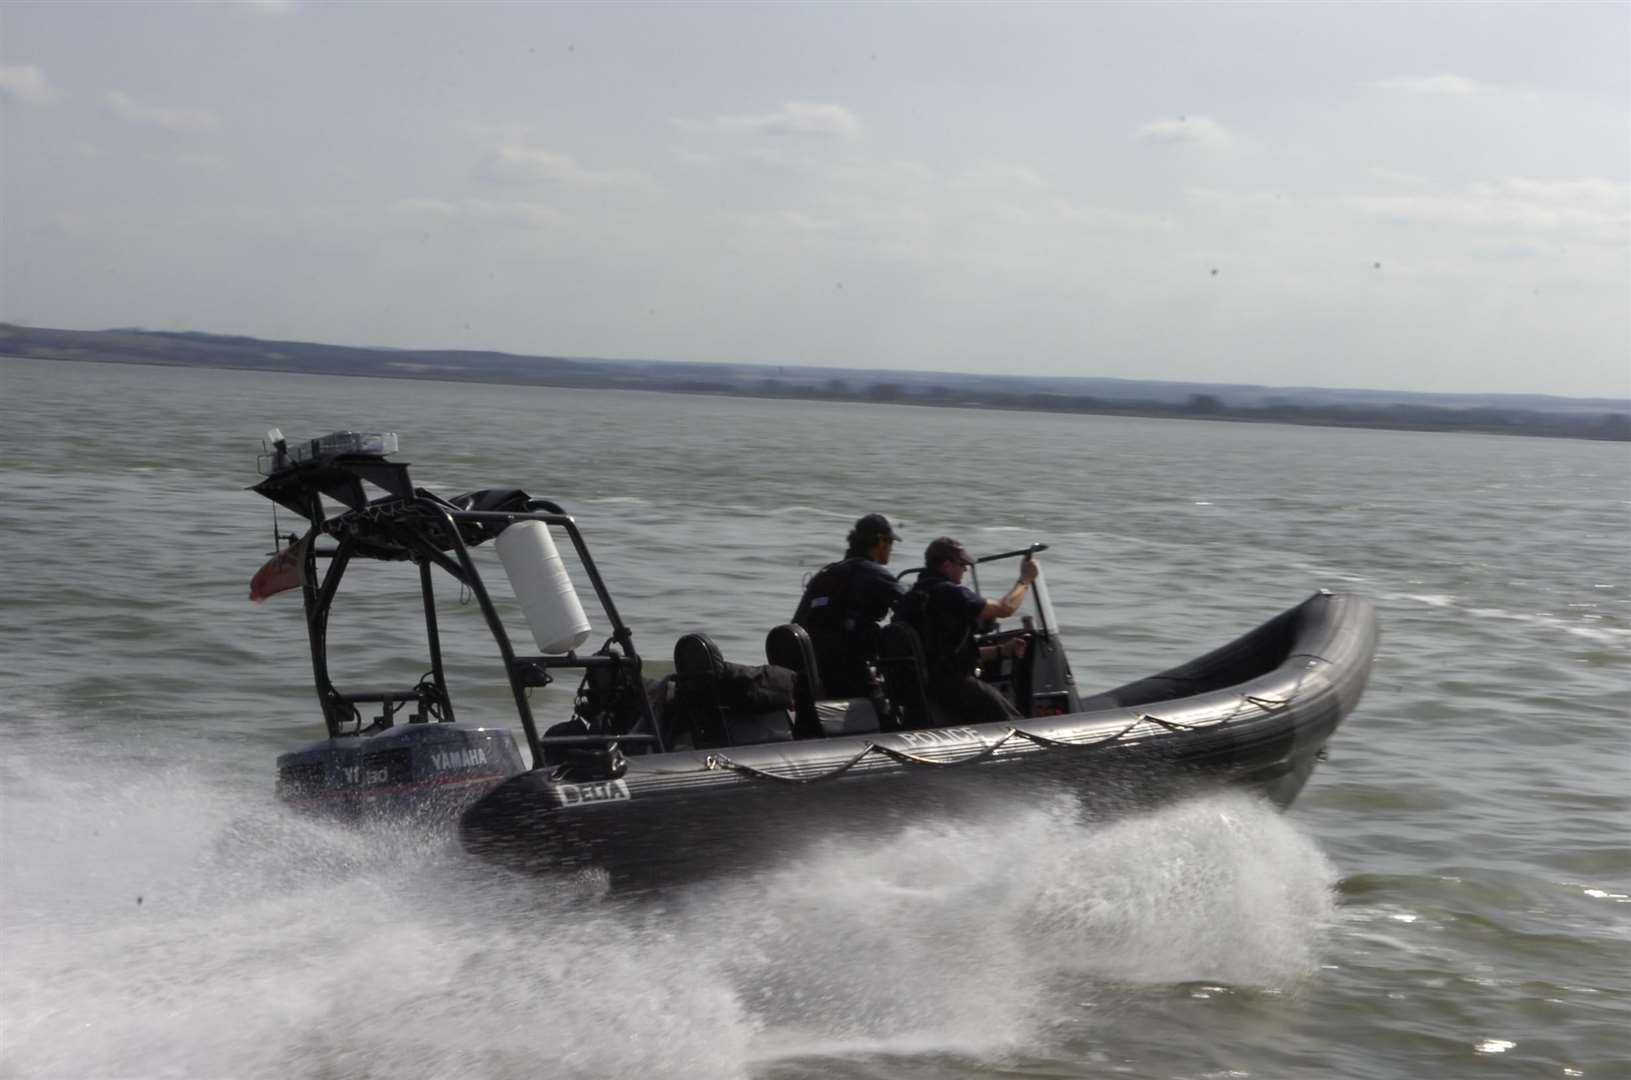 The Kent Police fast response patrol boat